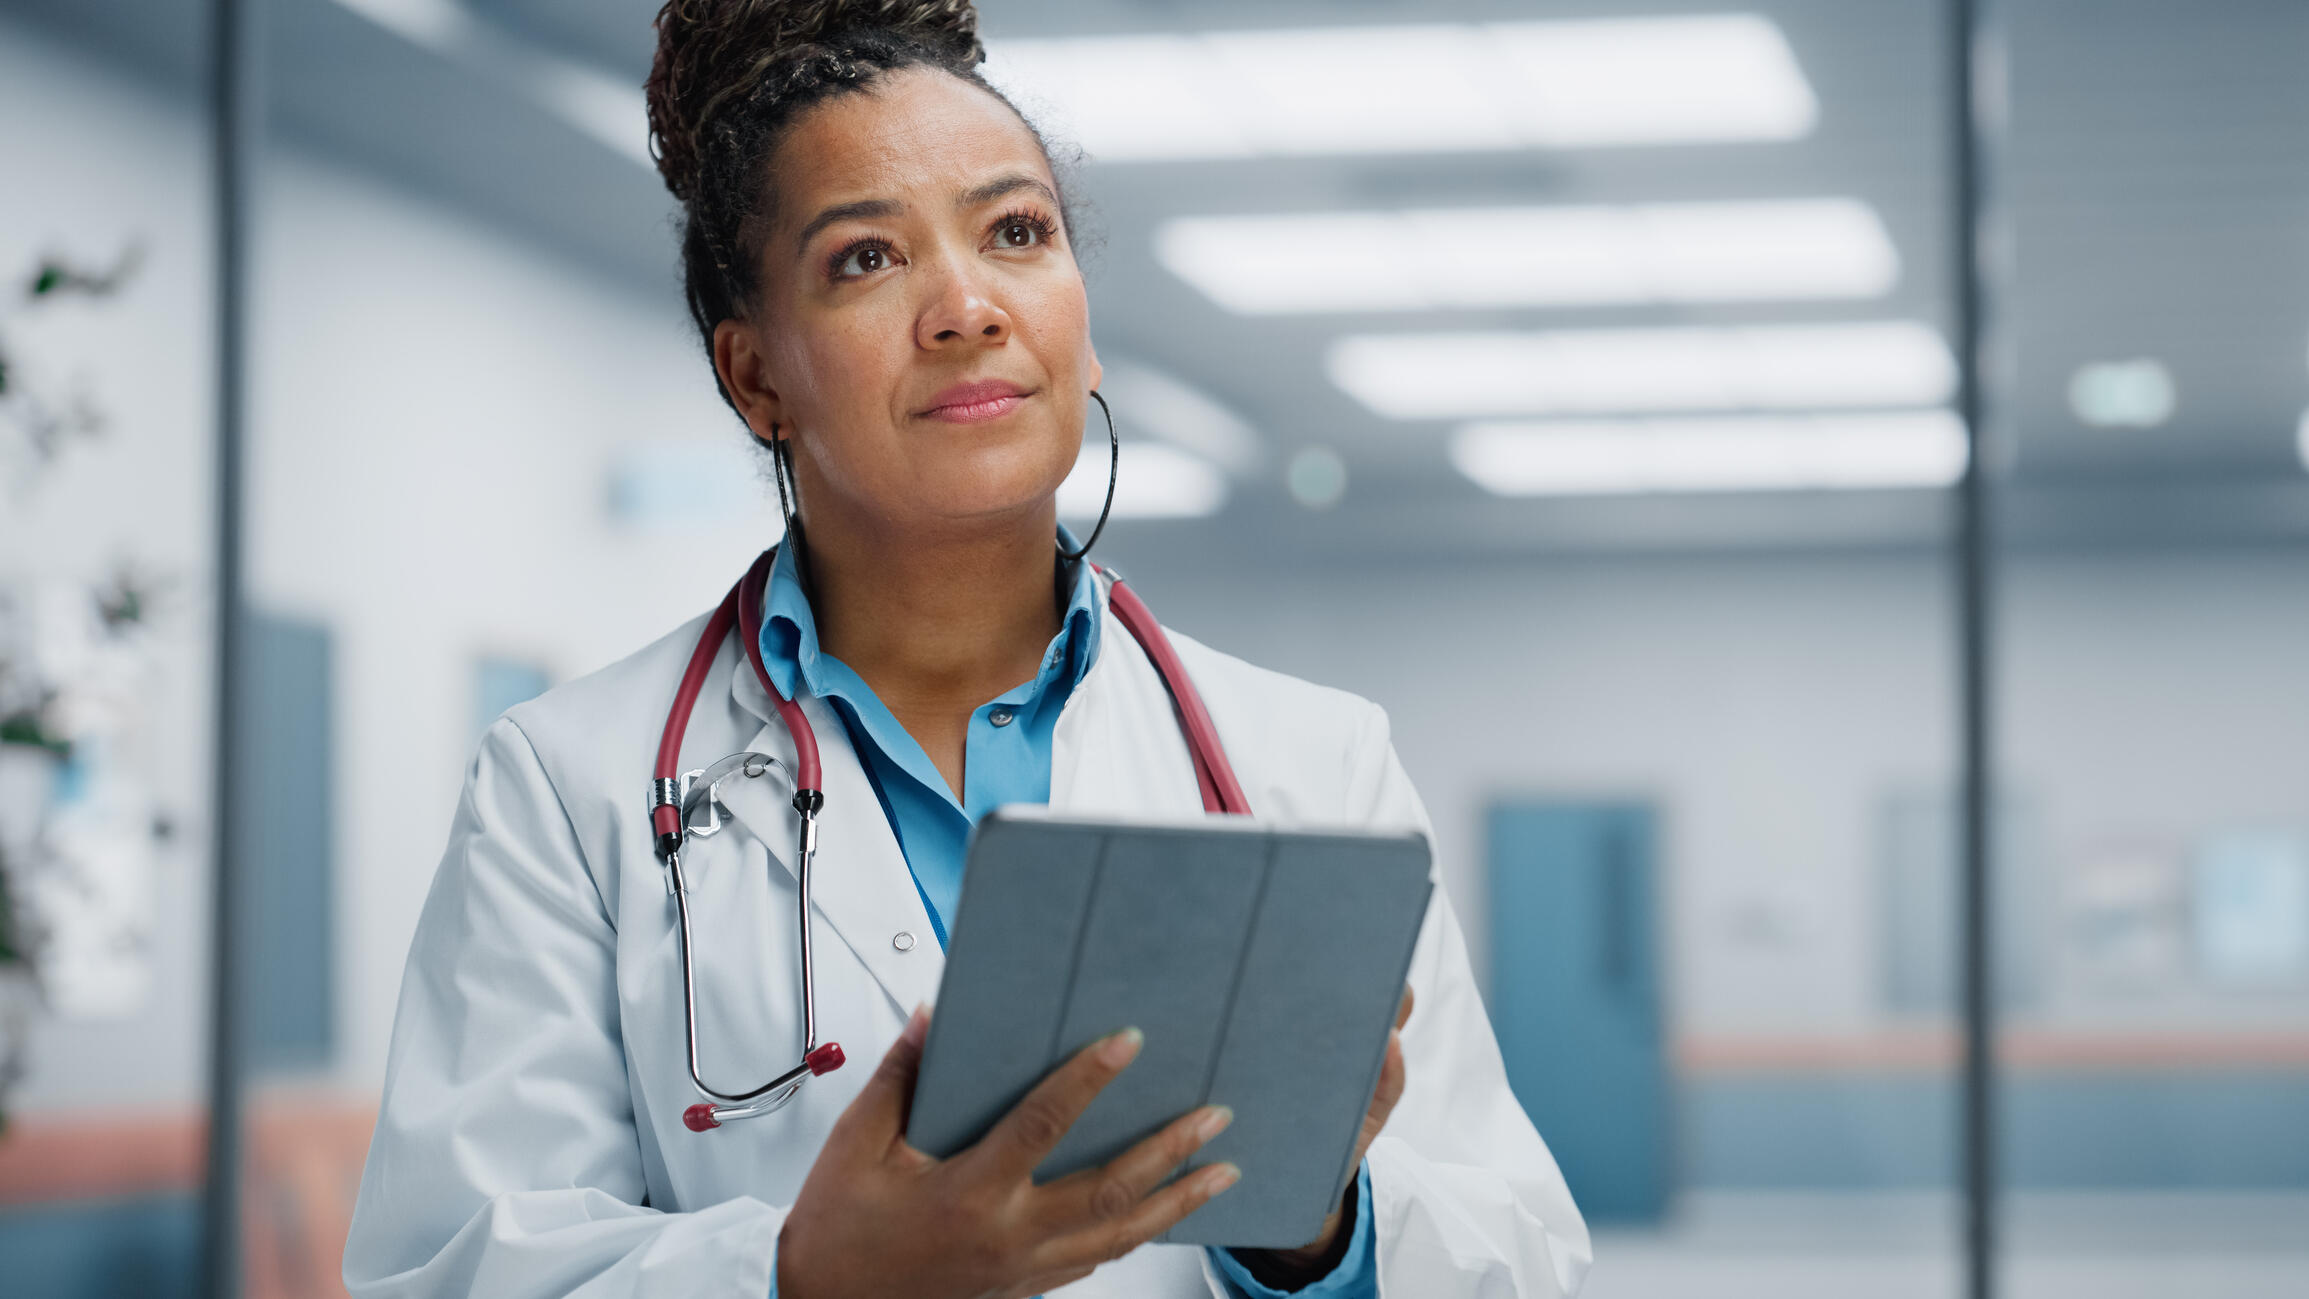 A photo of a doctor wearing a white lab coat and a stethoscope around their neck. They are holding at tablet and looking up. 